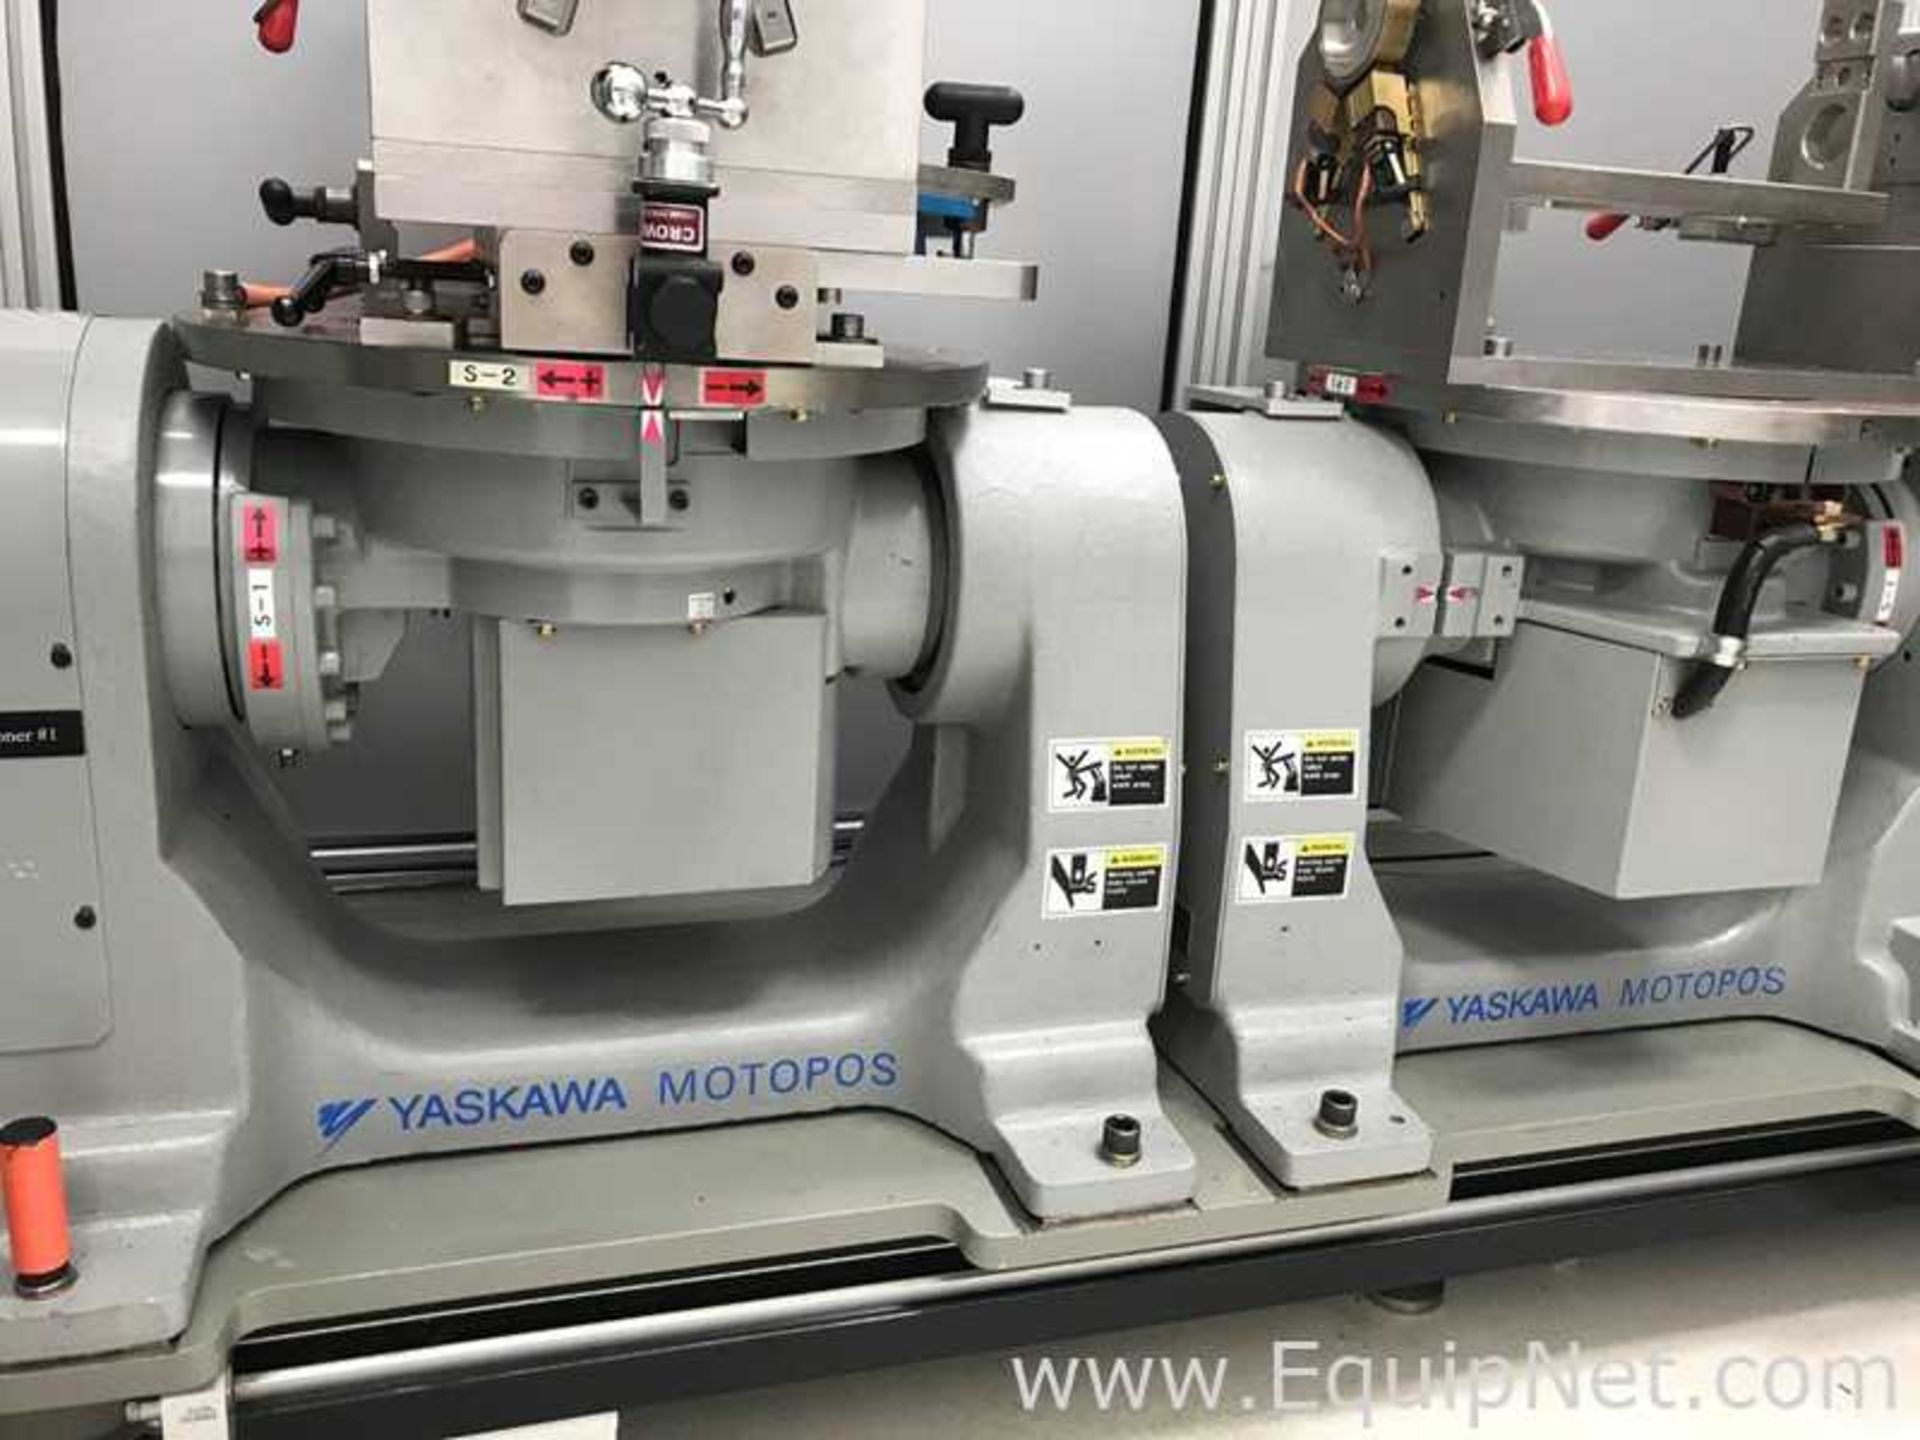 Liburdi Automation Laws 5000 Multi Axis Tig Welding Cell with 4 Yaskawa Robotic Positioners - Image 8 of 13